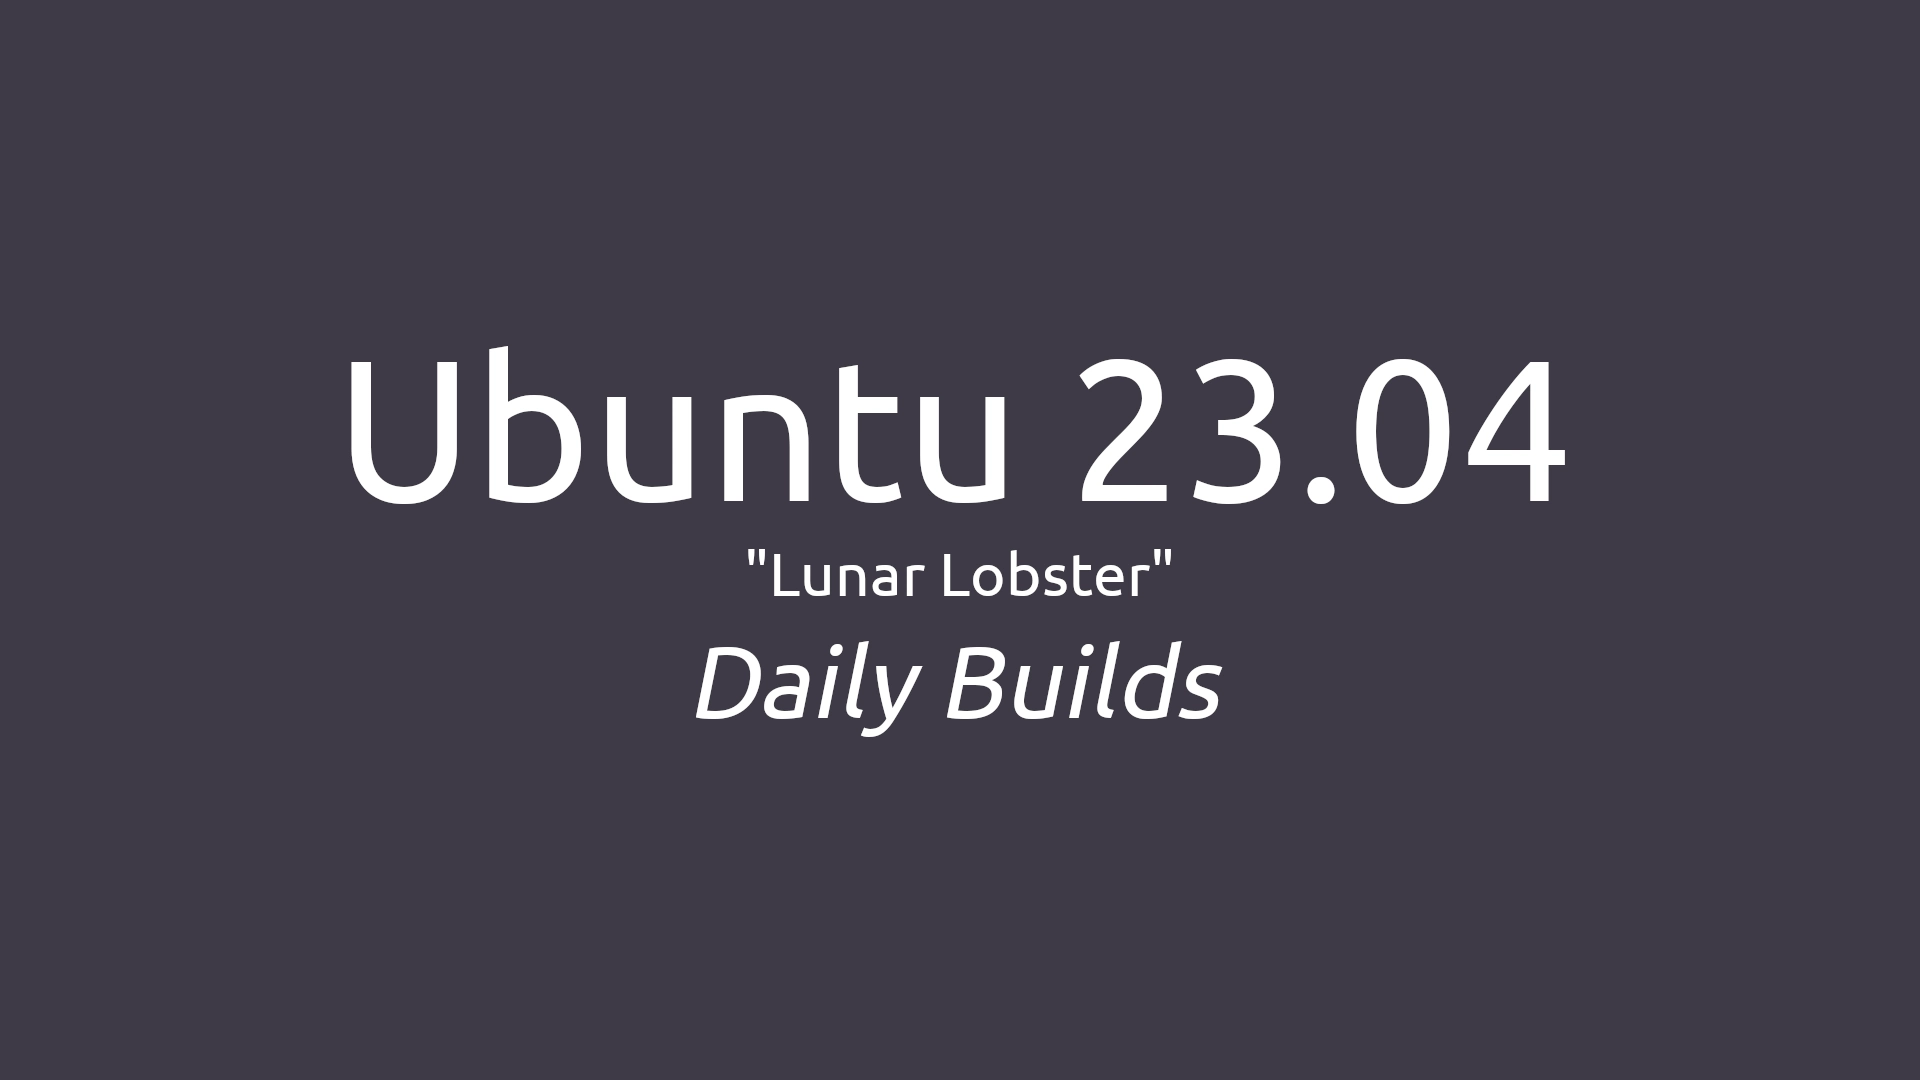 Ubuntu 23.04 (Lunar Lobster) Daily Builds Are Now Available for Download